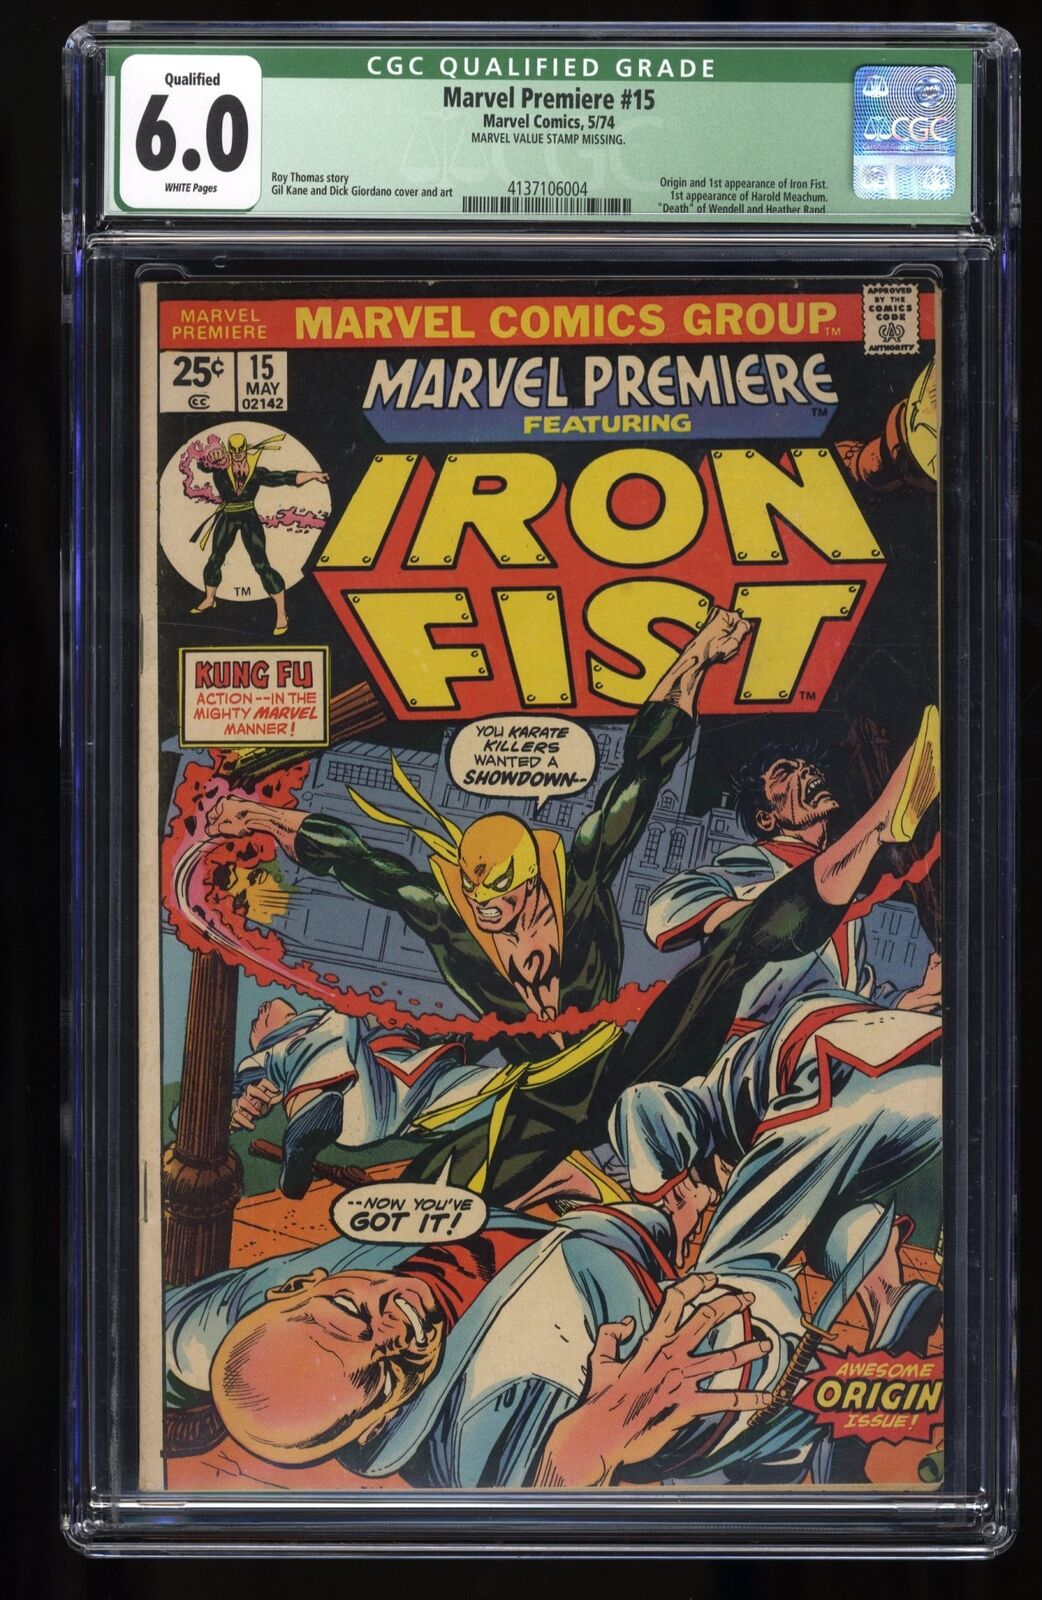 Marvel Premiere #15 CGC FN 6.0 (Qualified) 1st Appearance Origin Iron Fist